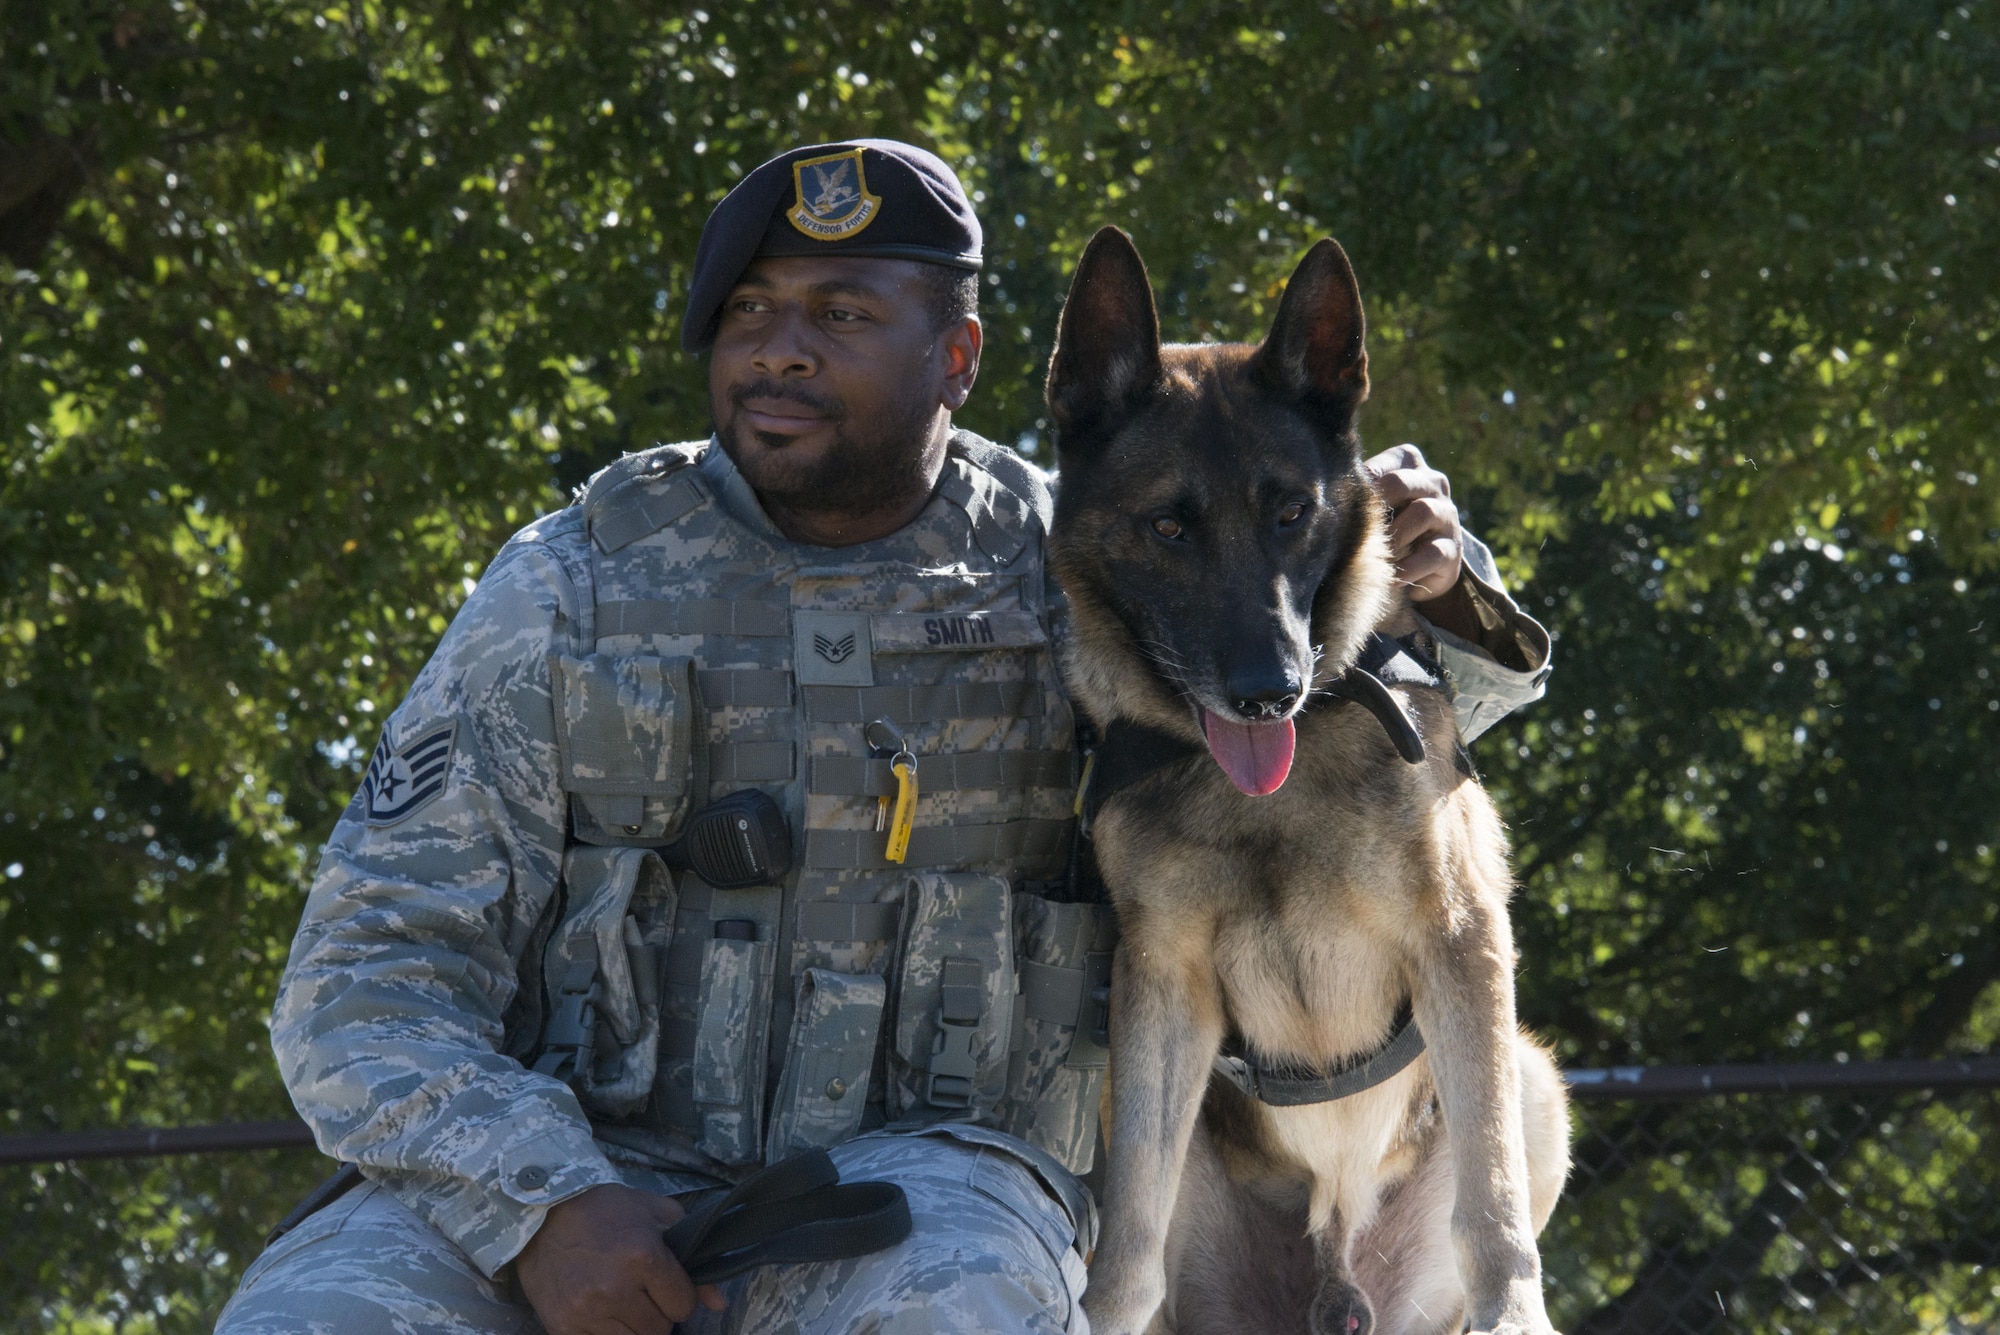 MWD Rocky leans toward his handler, Staff Sgt. Terrance Smith, when asked if he is ready to go to a new home at Maxwell Air Force Base, Oct. 6, 2016. Rocky is set to retire from military service at the end of October, and will join his work partner on their home couch. (U.S. Air Force photo by Senior Airman William Blankenship)